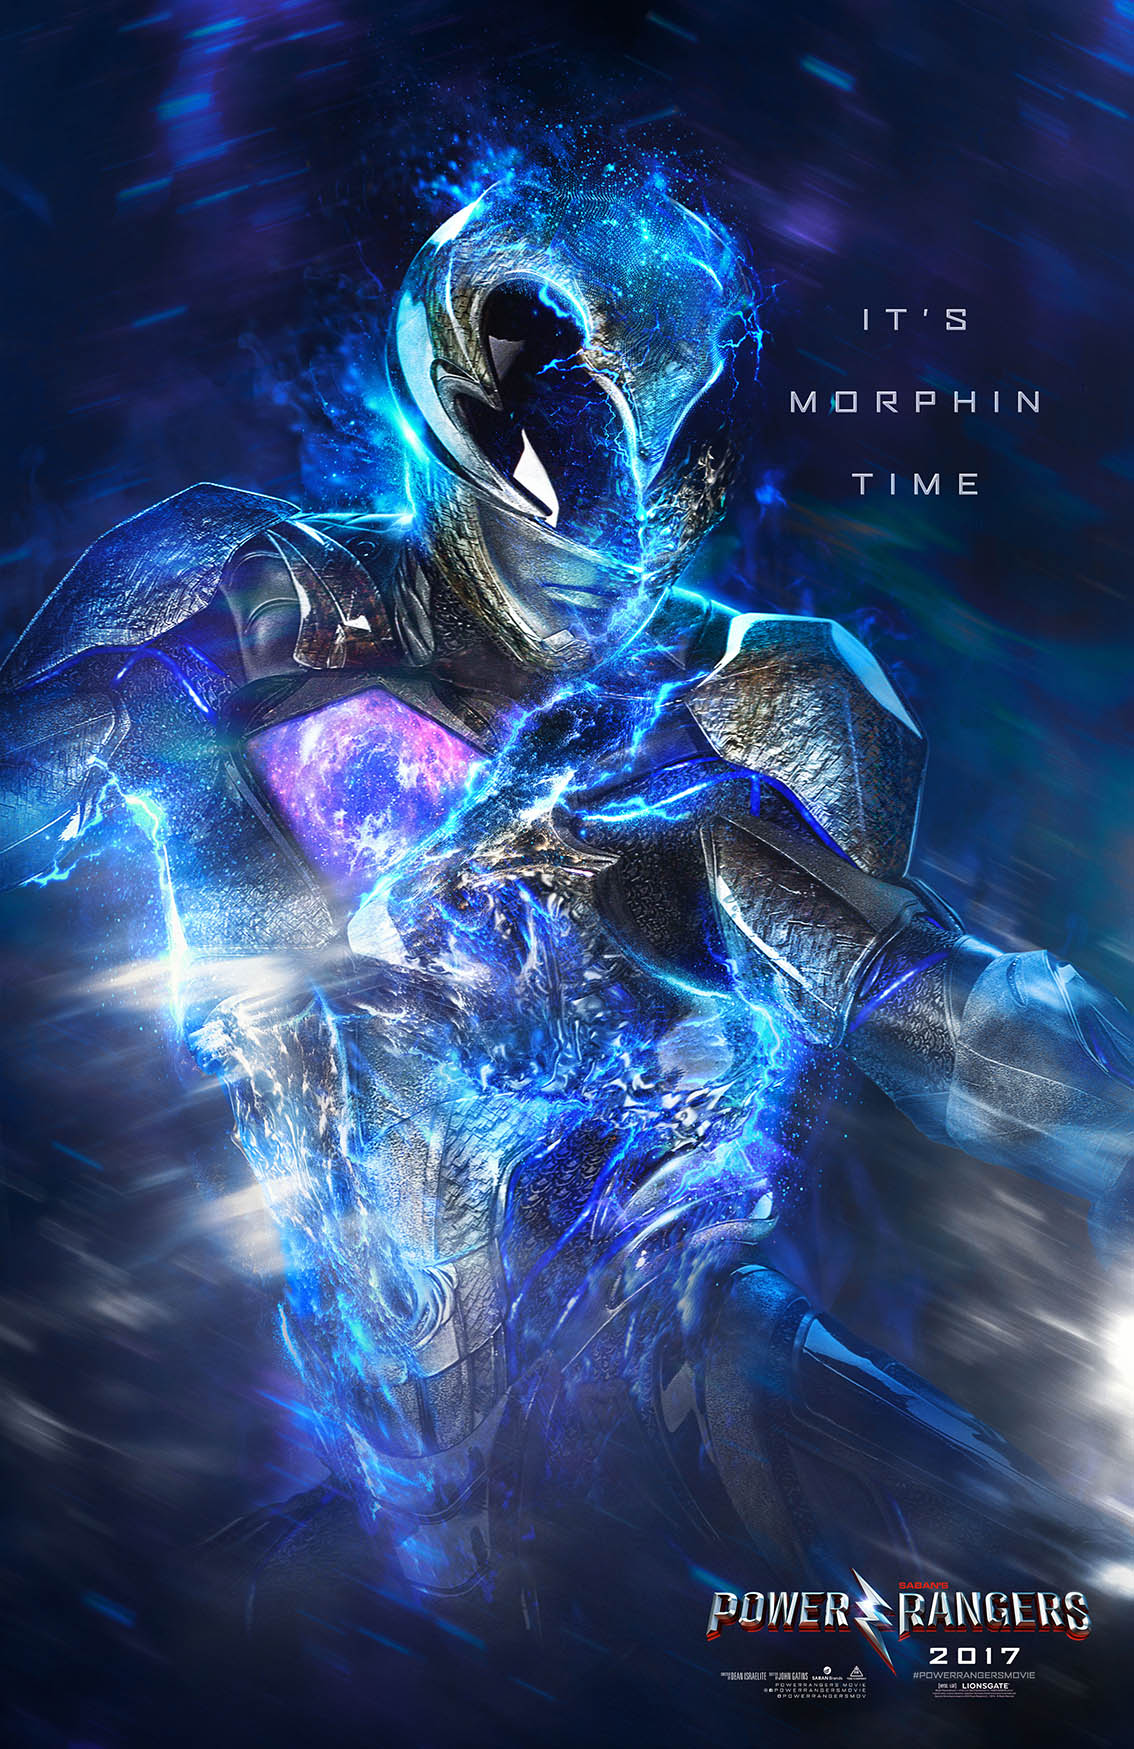 poster designs photoshop power rangers by chris christodoulou